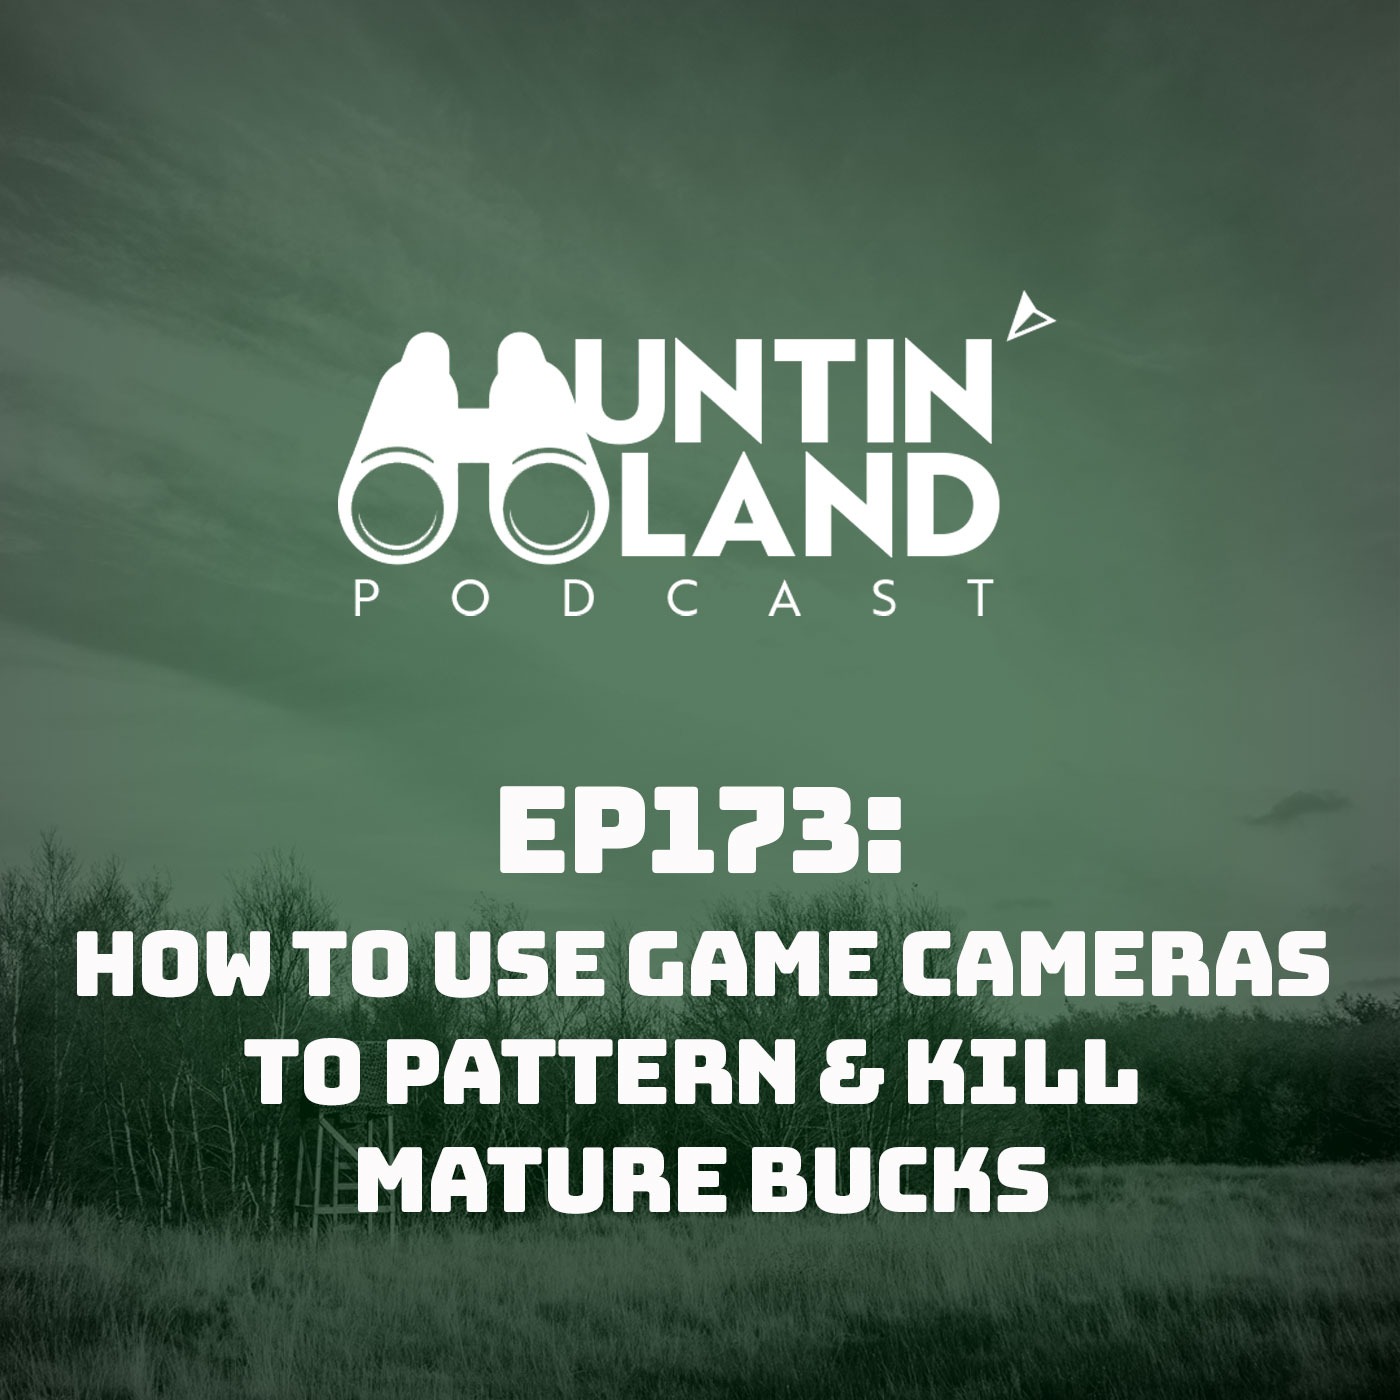 How to Use Game Cameras to Pattern and Kill Mature Bucks